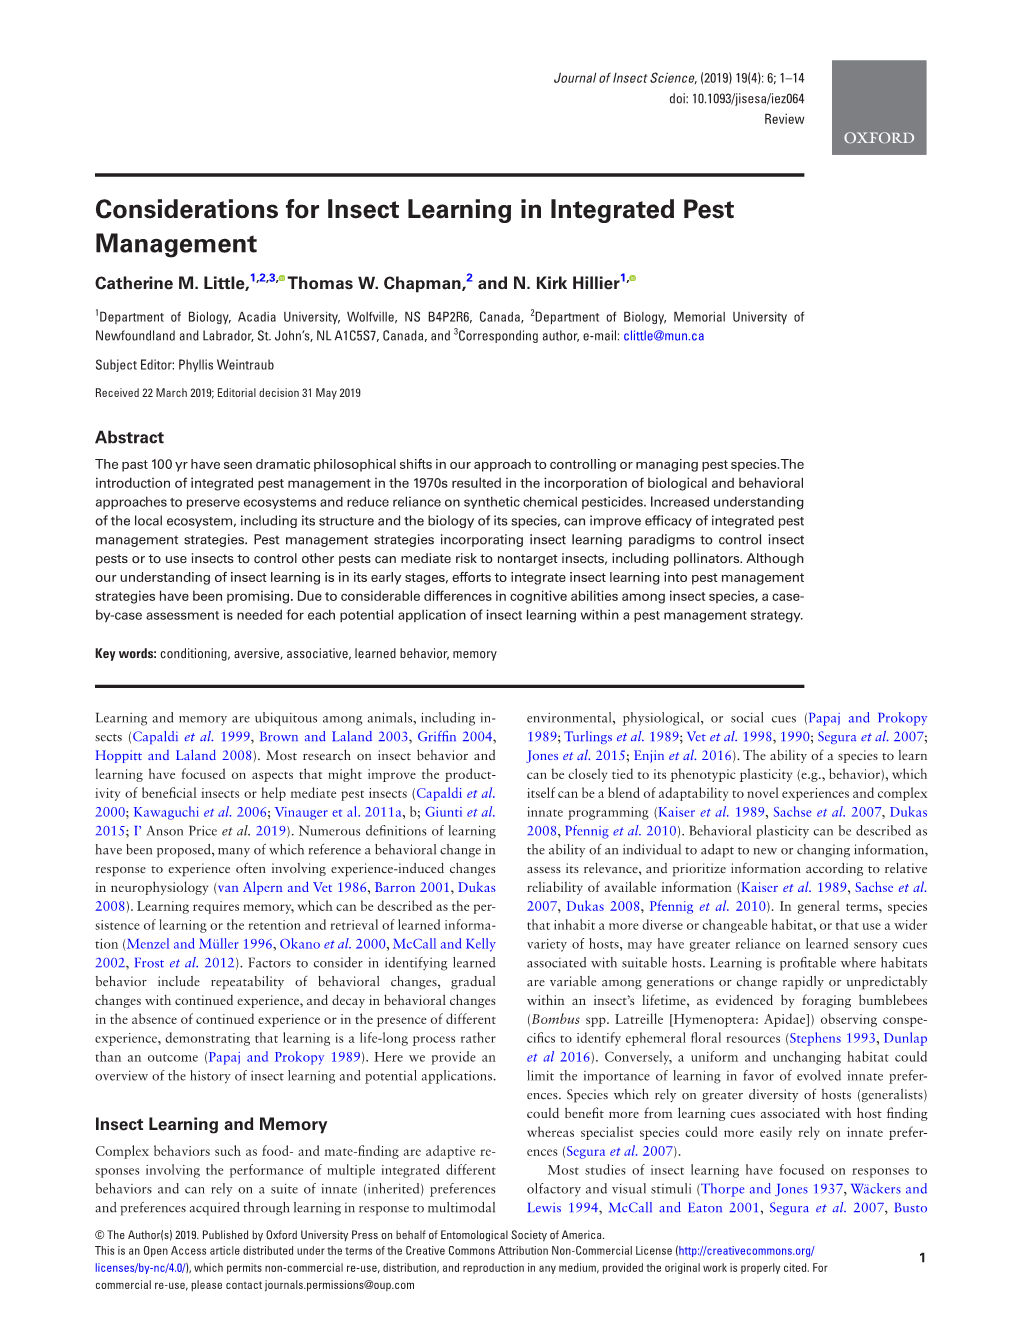 Considerations for Insect Learning in Integrated Pest Management